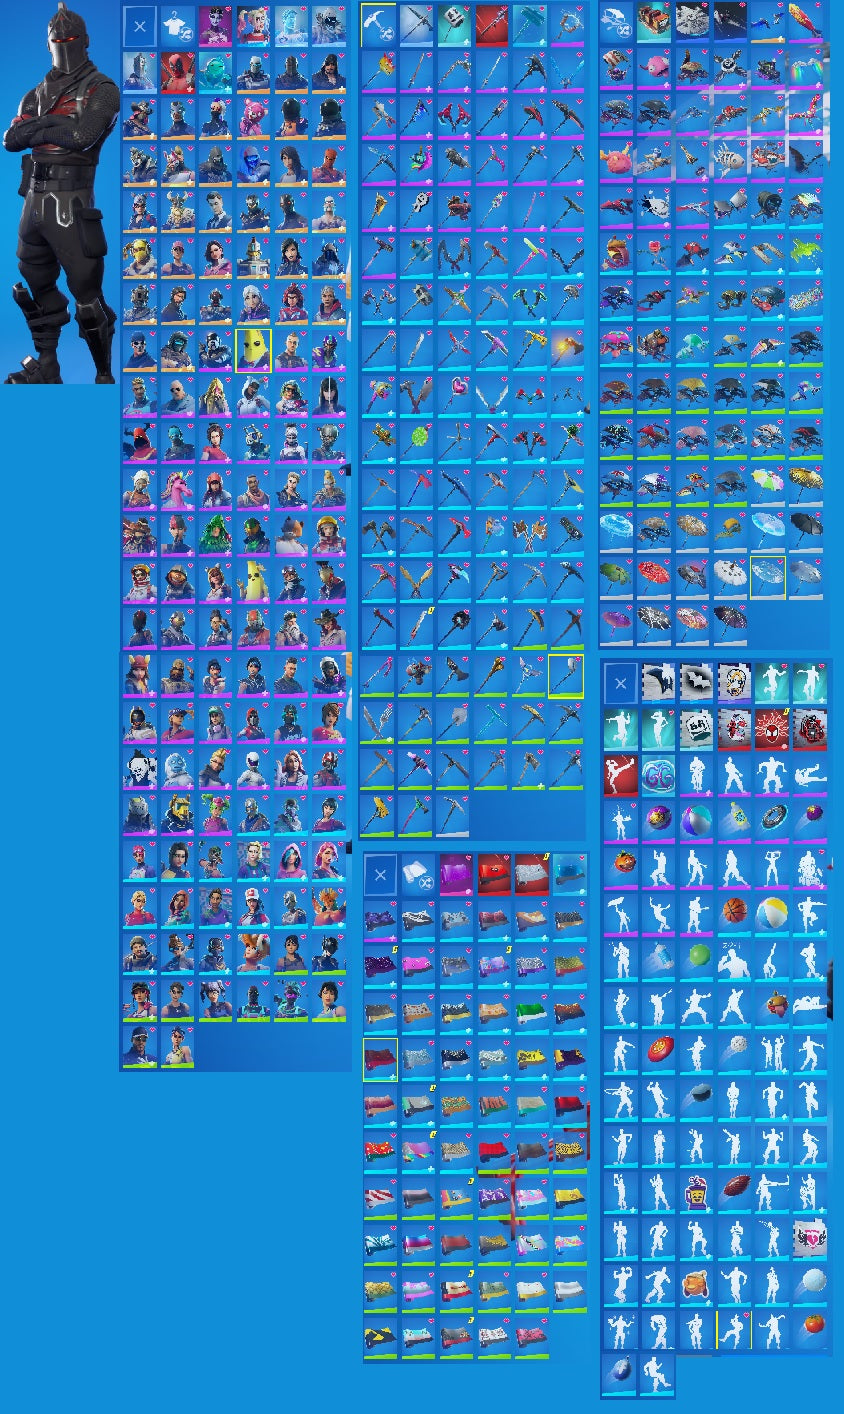 Black Knight | Xbox and PSN Linkable | 132 Outfits | The Reaper | Omega | Drift | Candy Axe